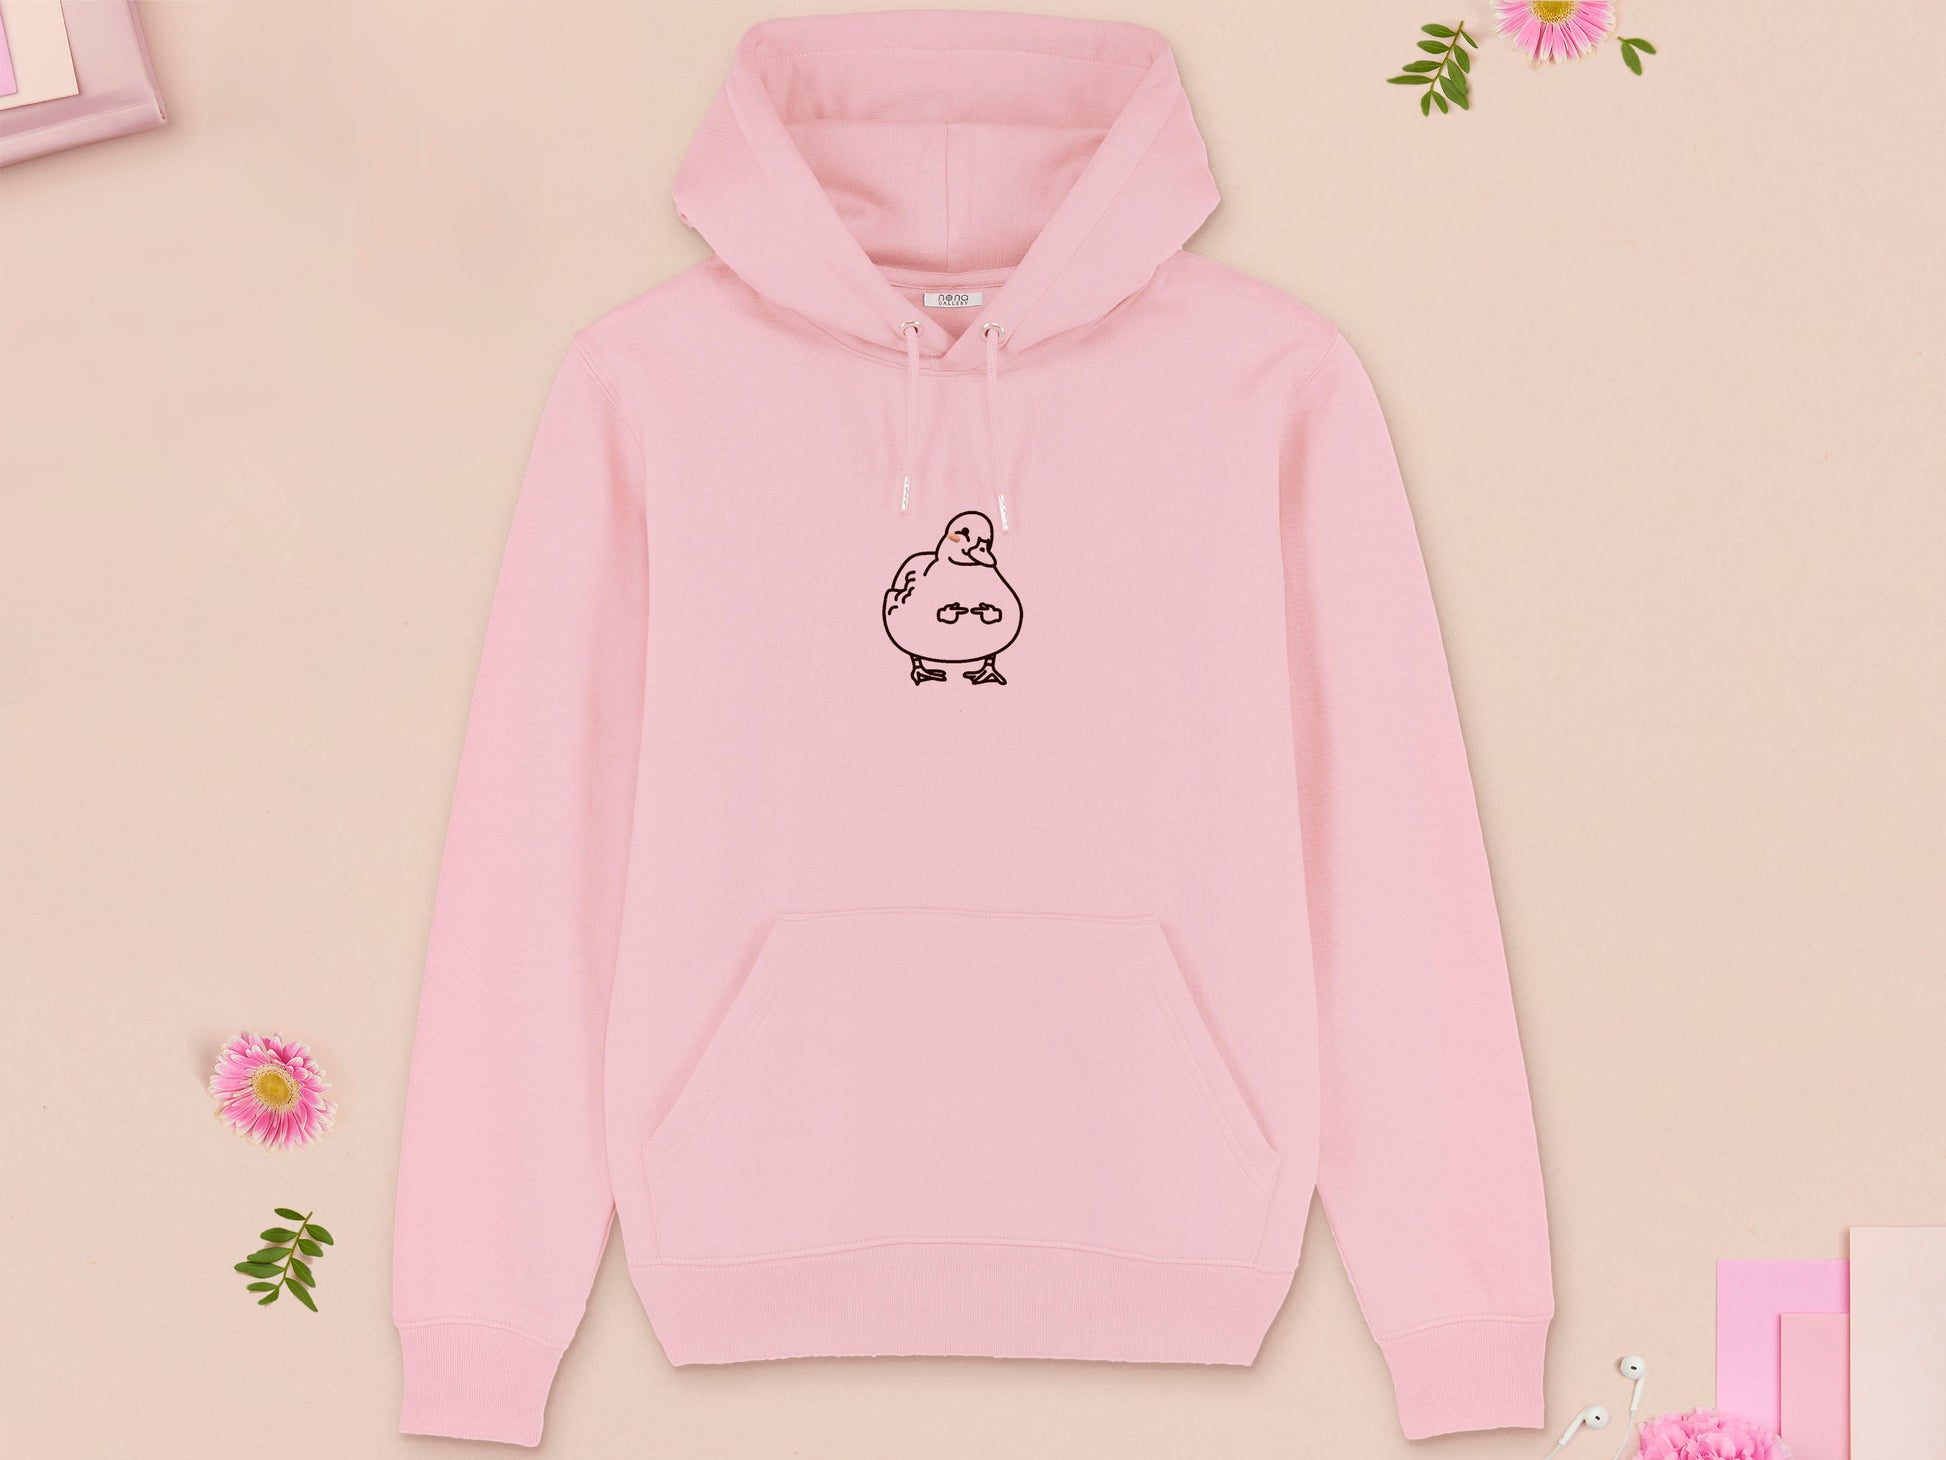 A pink long sleeve fleece hoodie, with an embroidered brown thread design of cute blushing duck with the for me finger hand emoji symbols